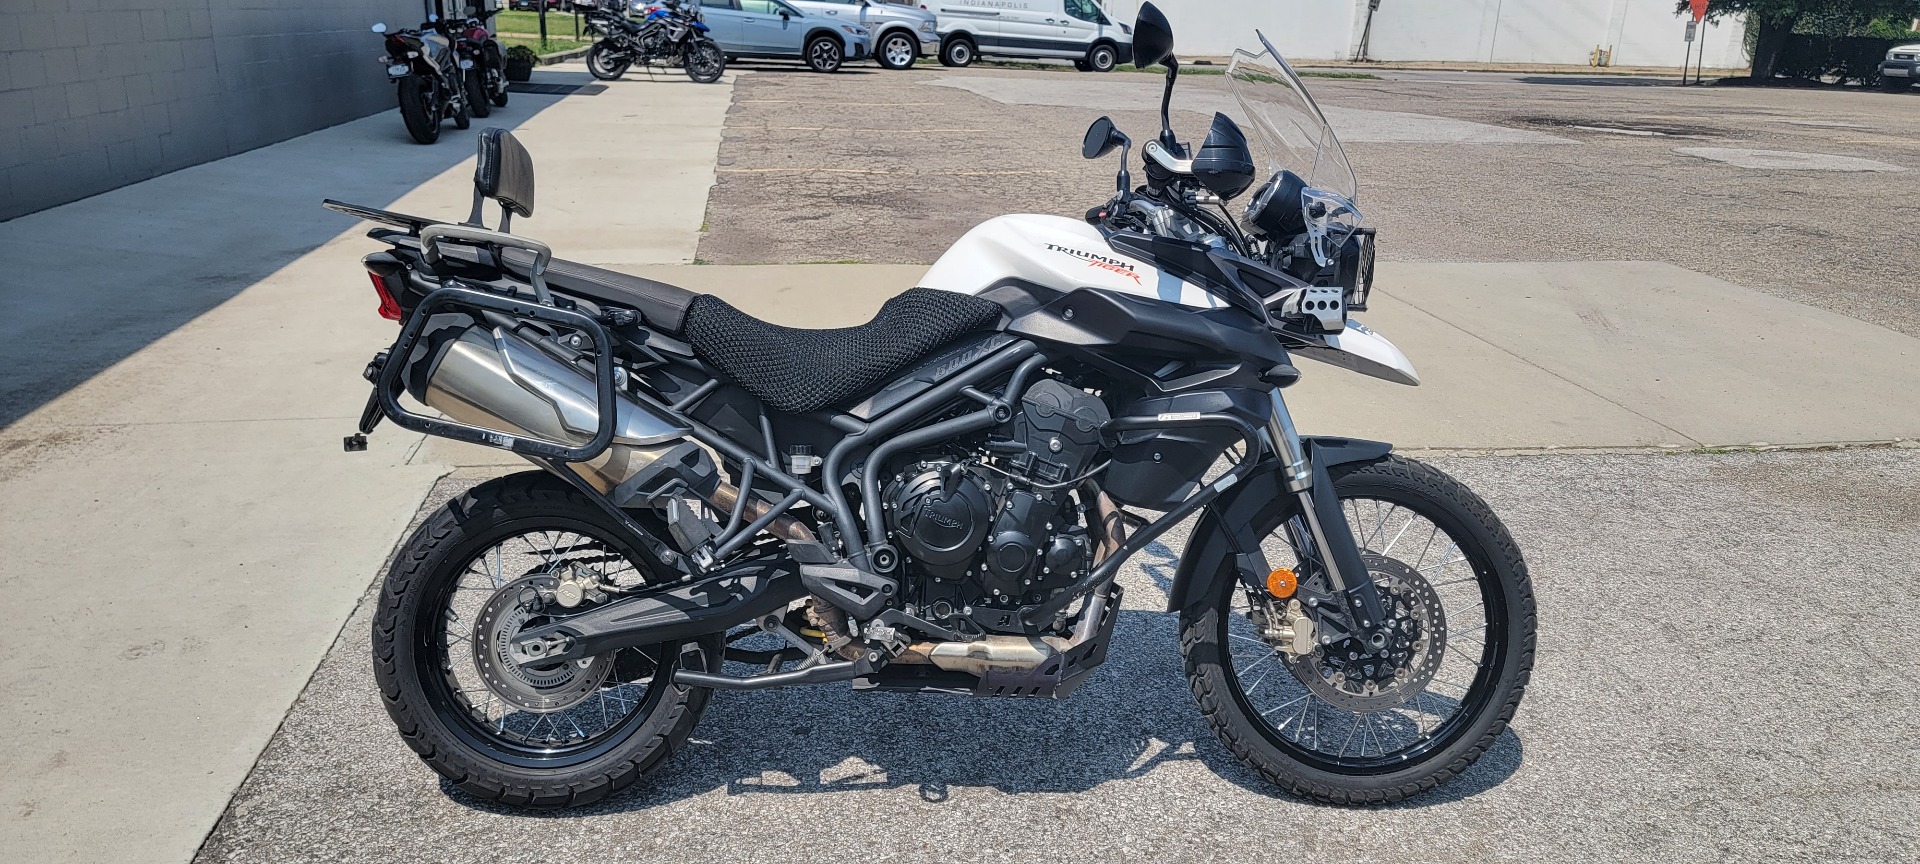 2014 Triumph Tiger 800 XC ABS in Indianapolis, Indiana - Photo 1